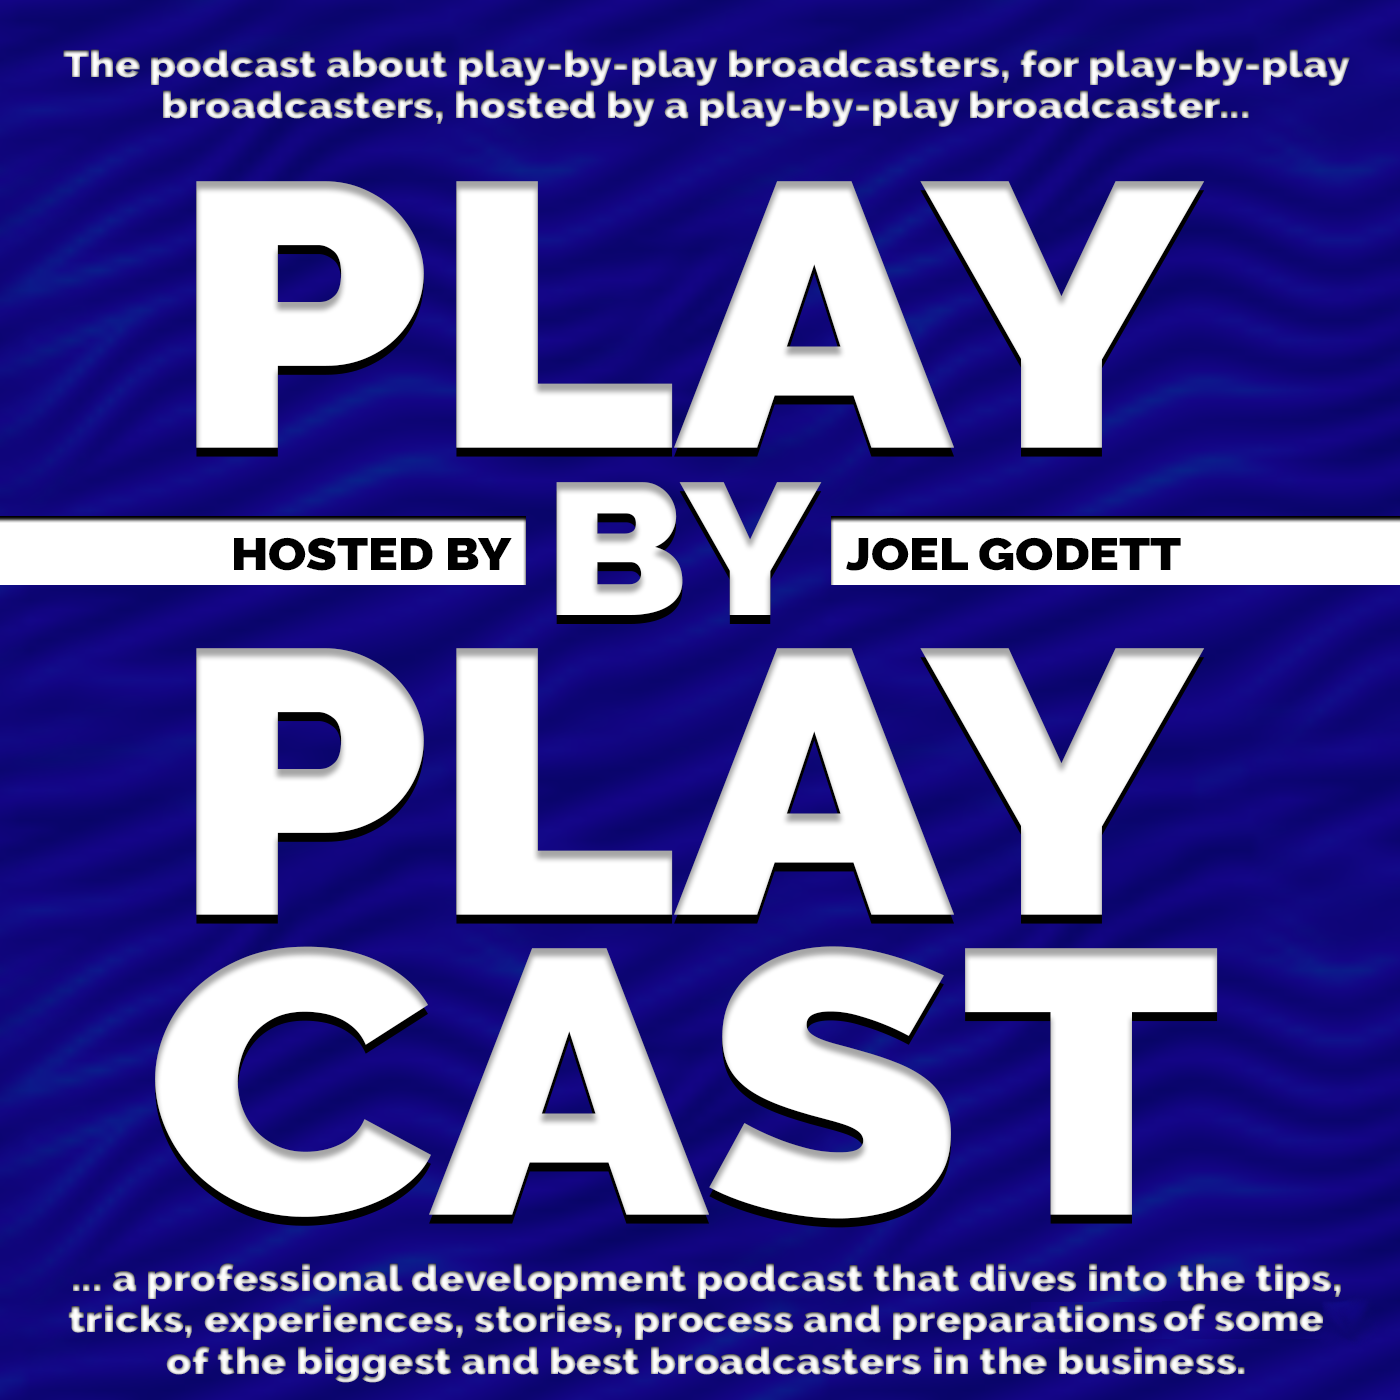 Play-by-Playcast